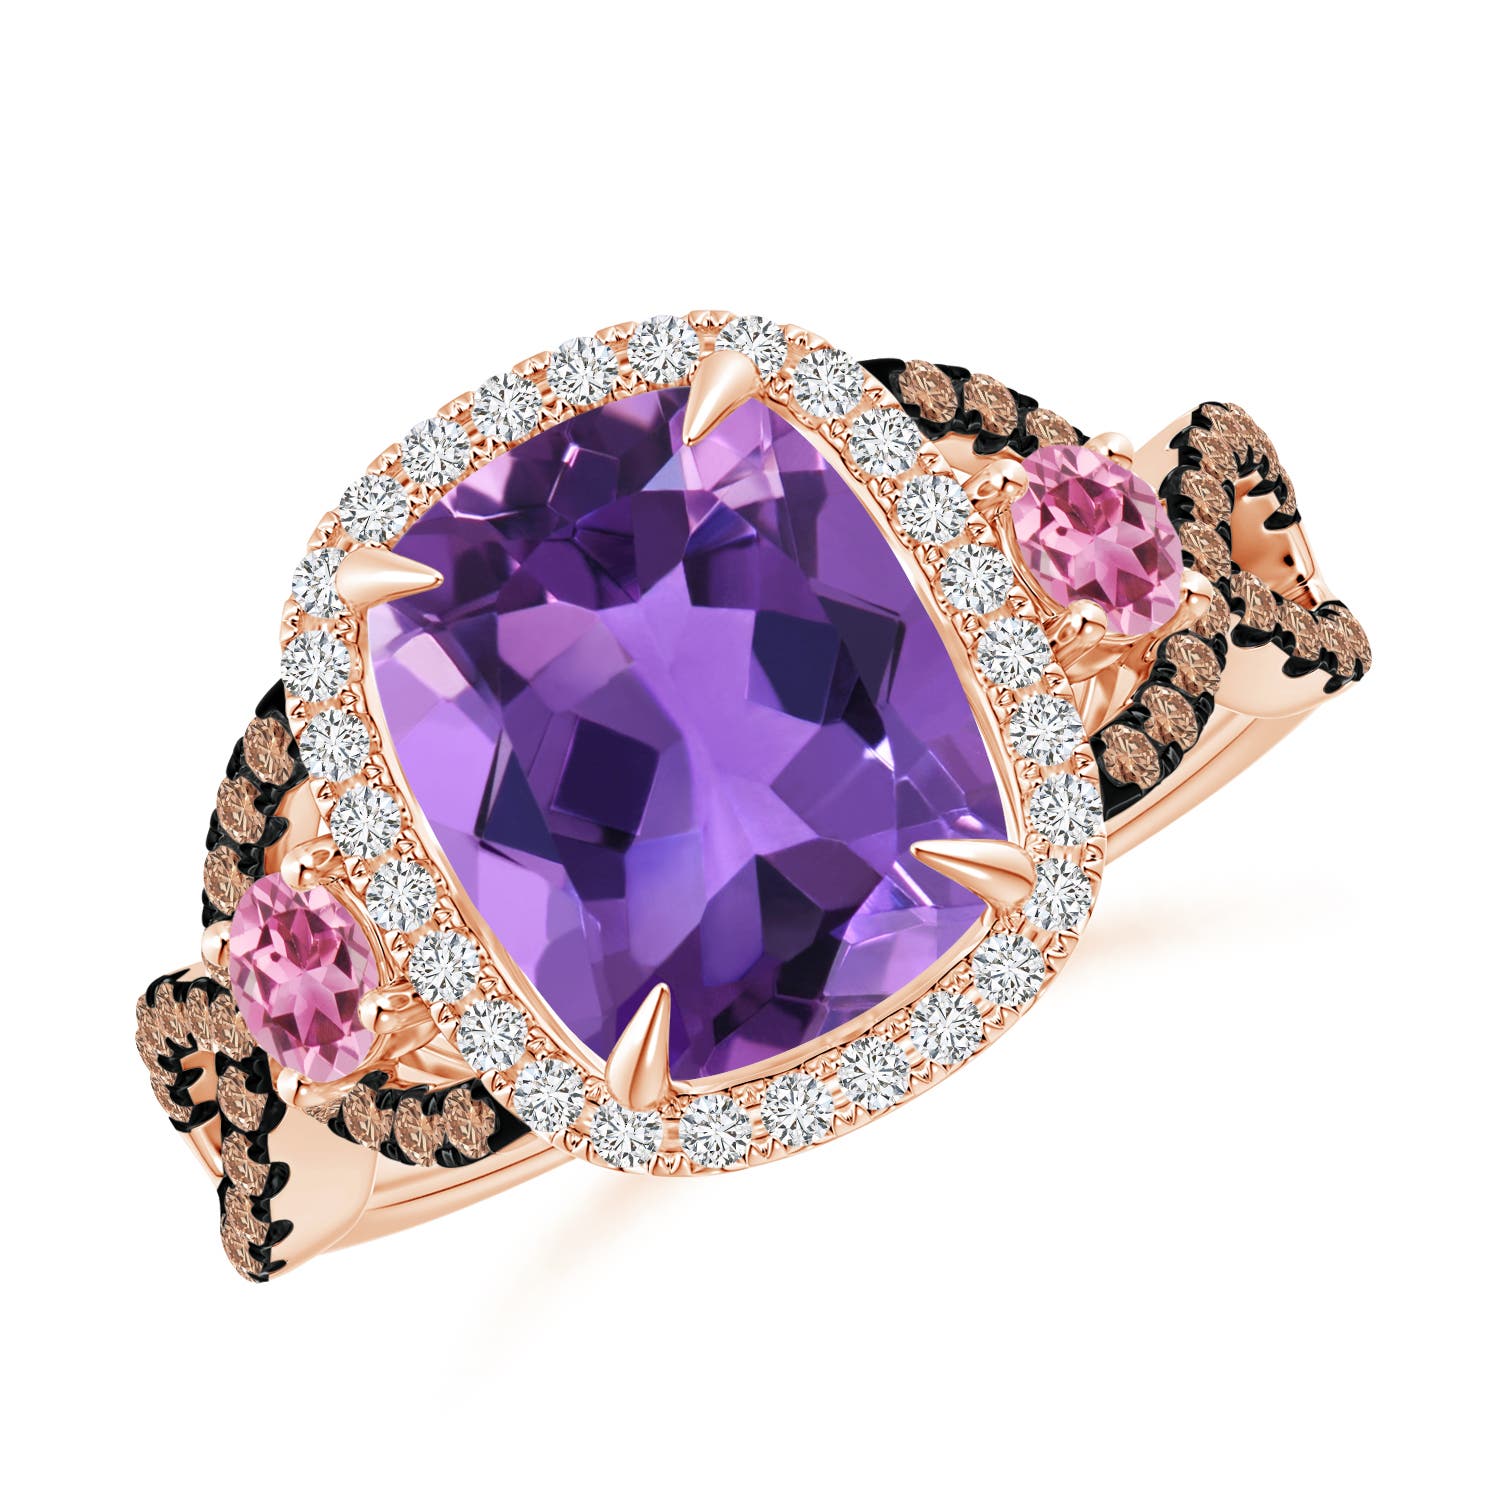 AAA - Amethyst / 3.39 CT / 14 KT Rose Gold